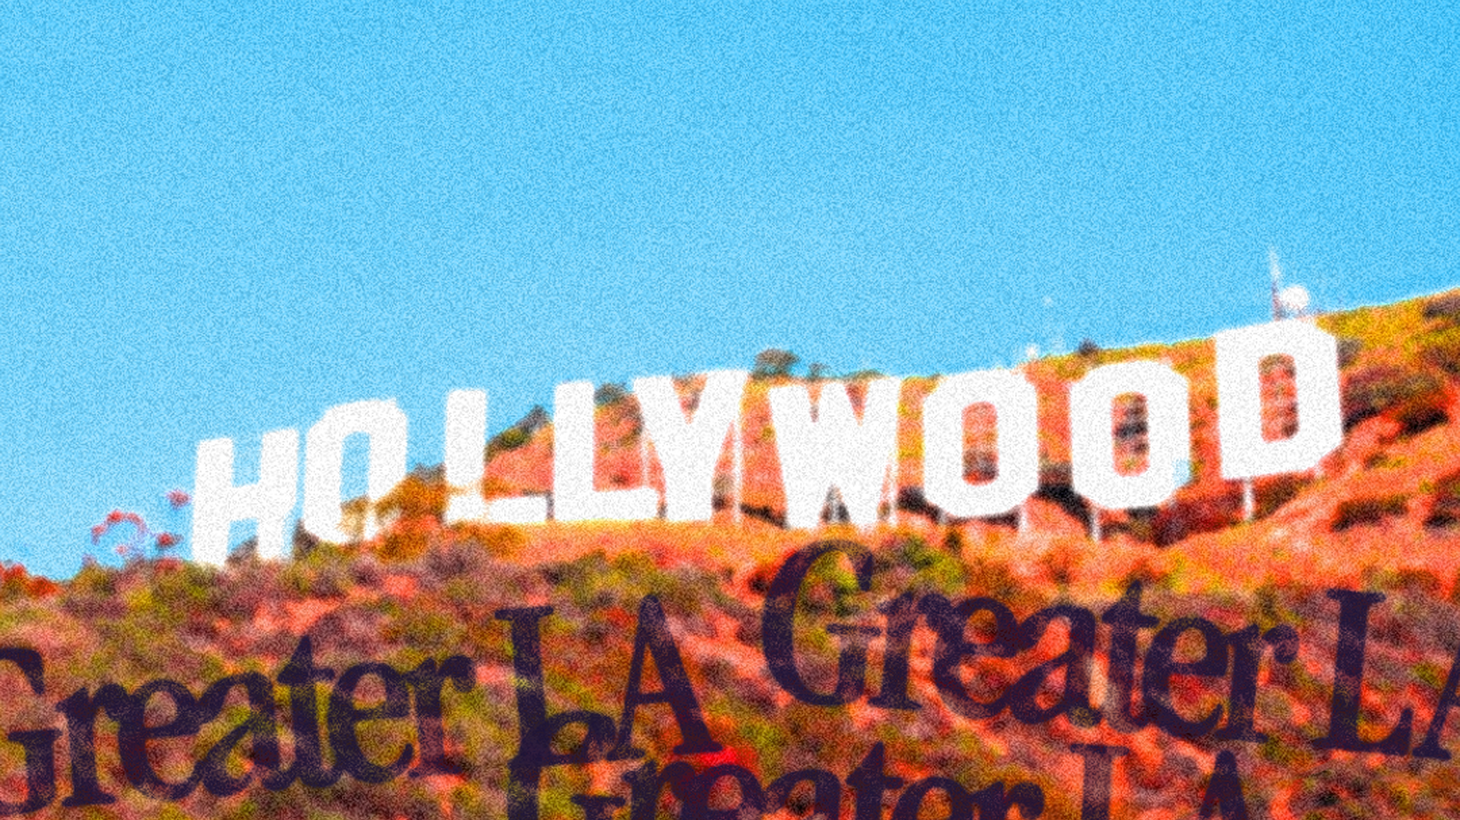 Greater LA takes a look at 100 years of the Hollywood Sign and its lore.